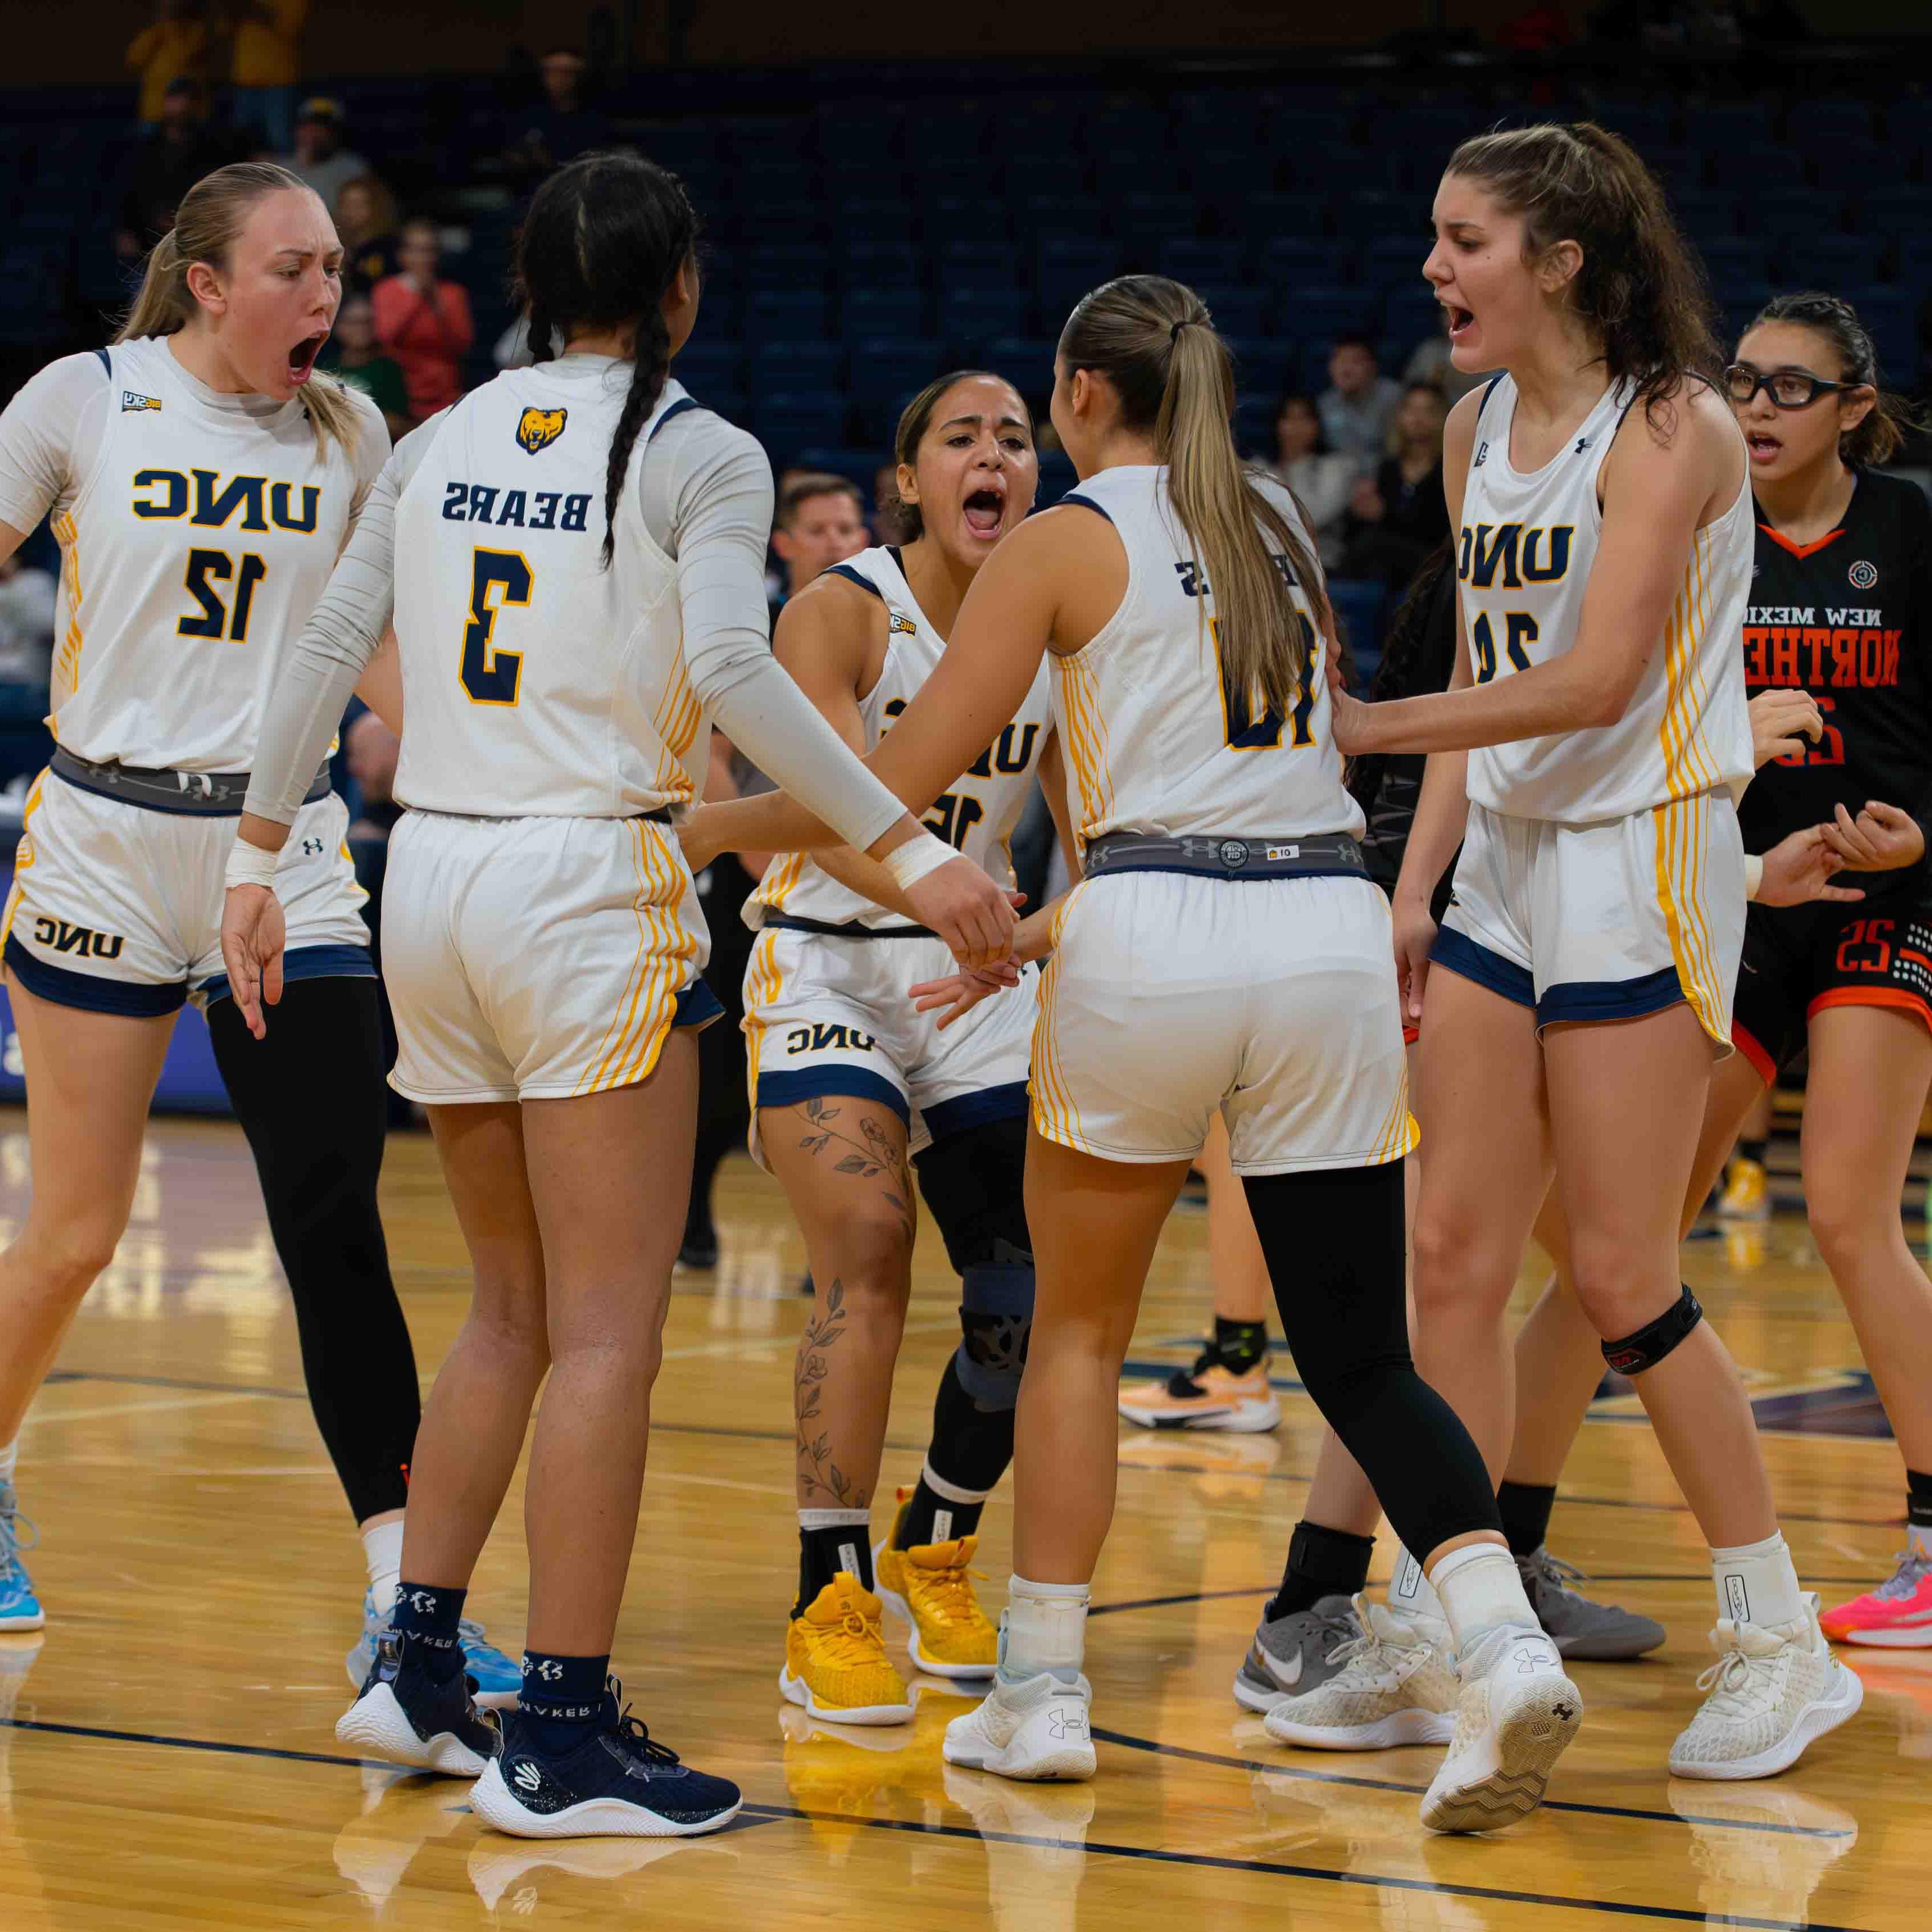 Women's basketball players celebrate on the court during a game.